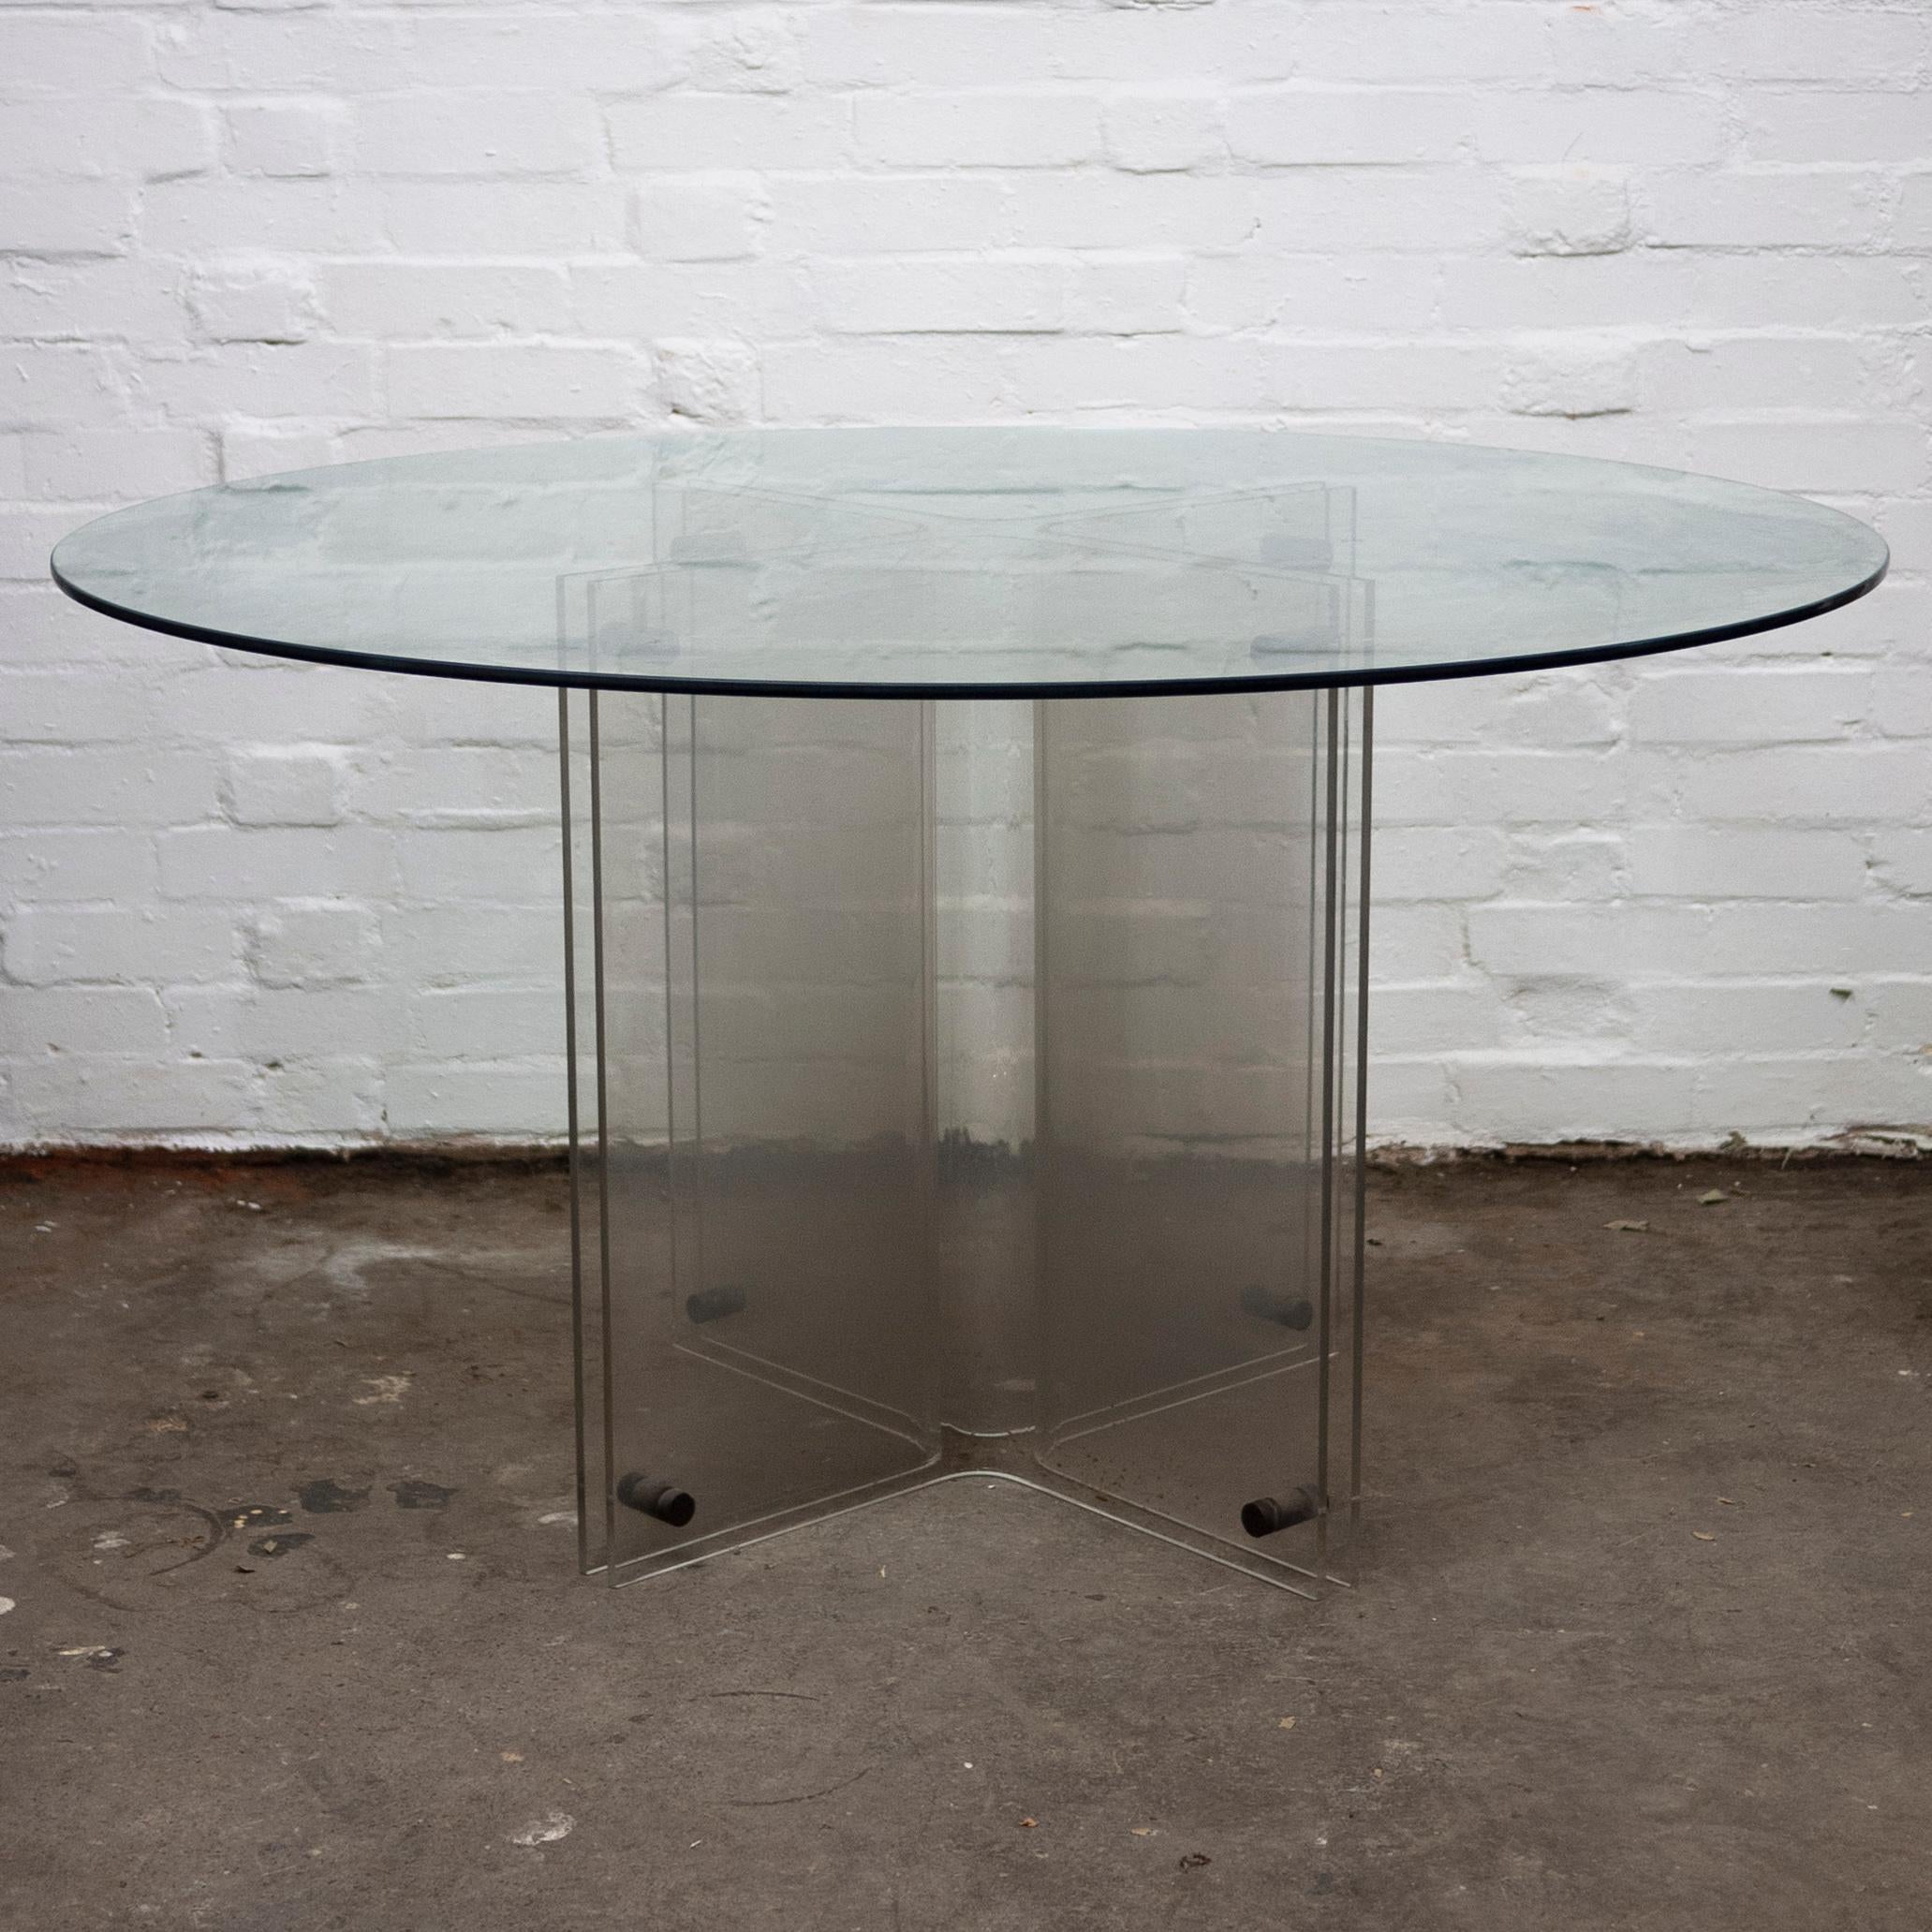 Vintage Hollywood Regency Lucite and Glass Round Dining Table, 1980s For Sale 3